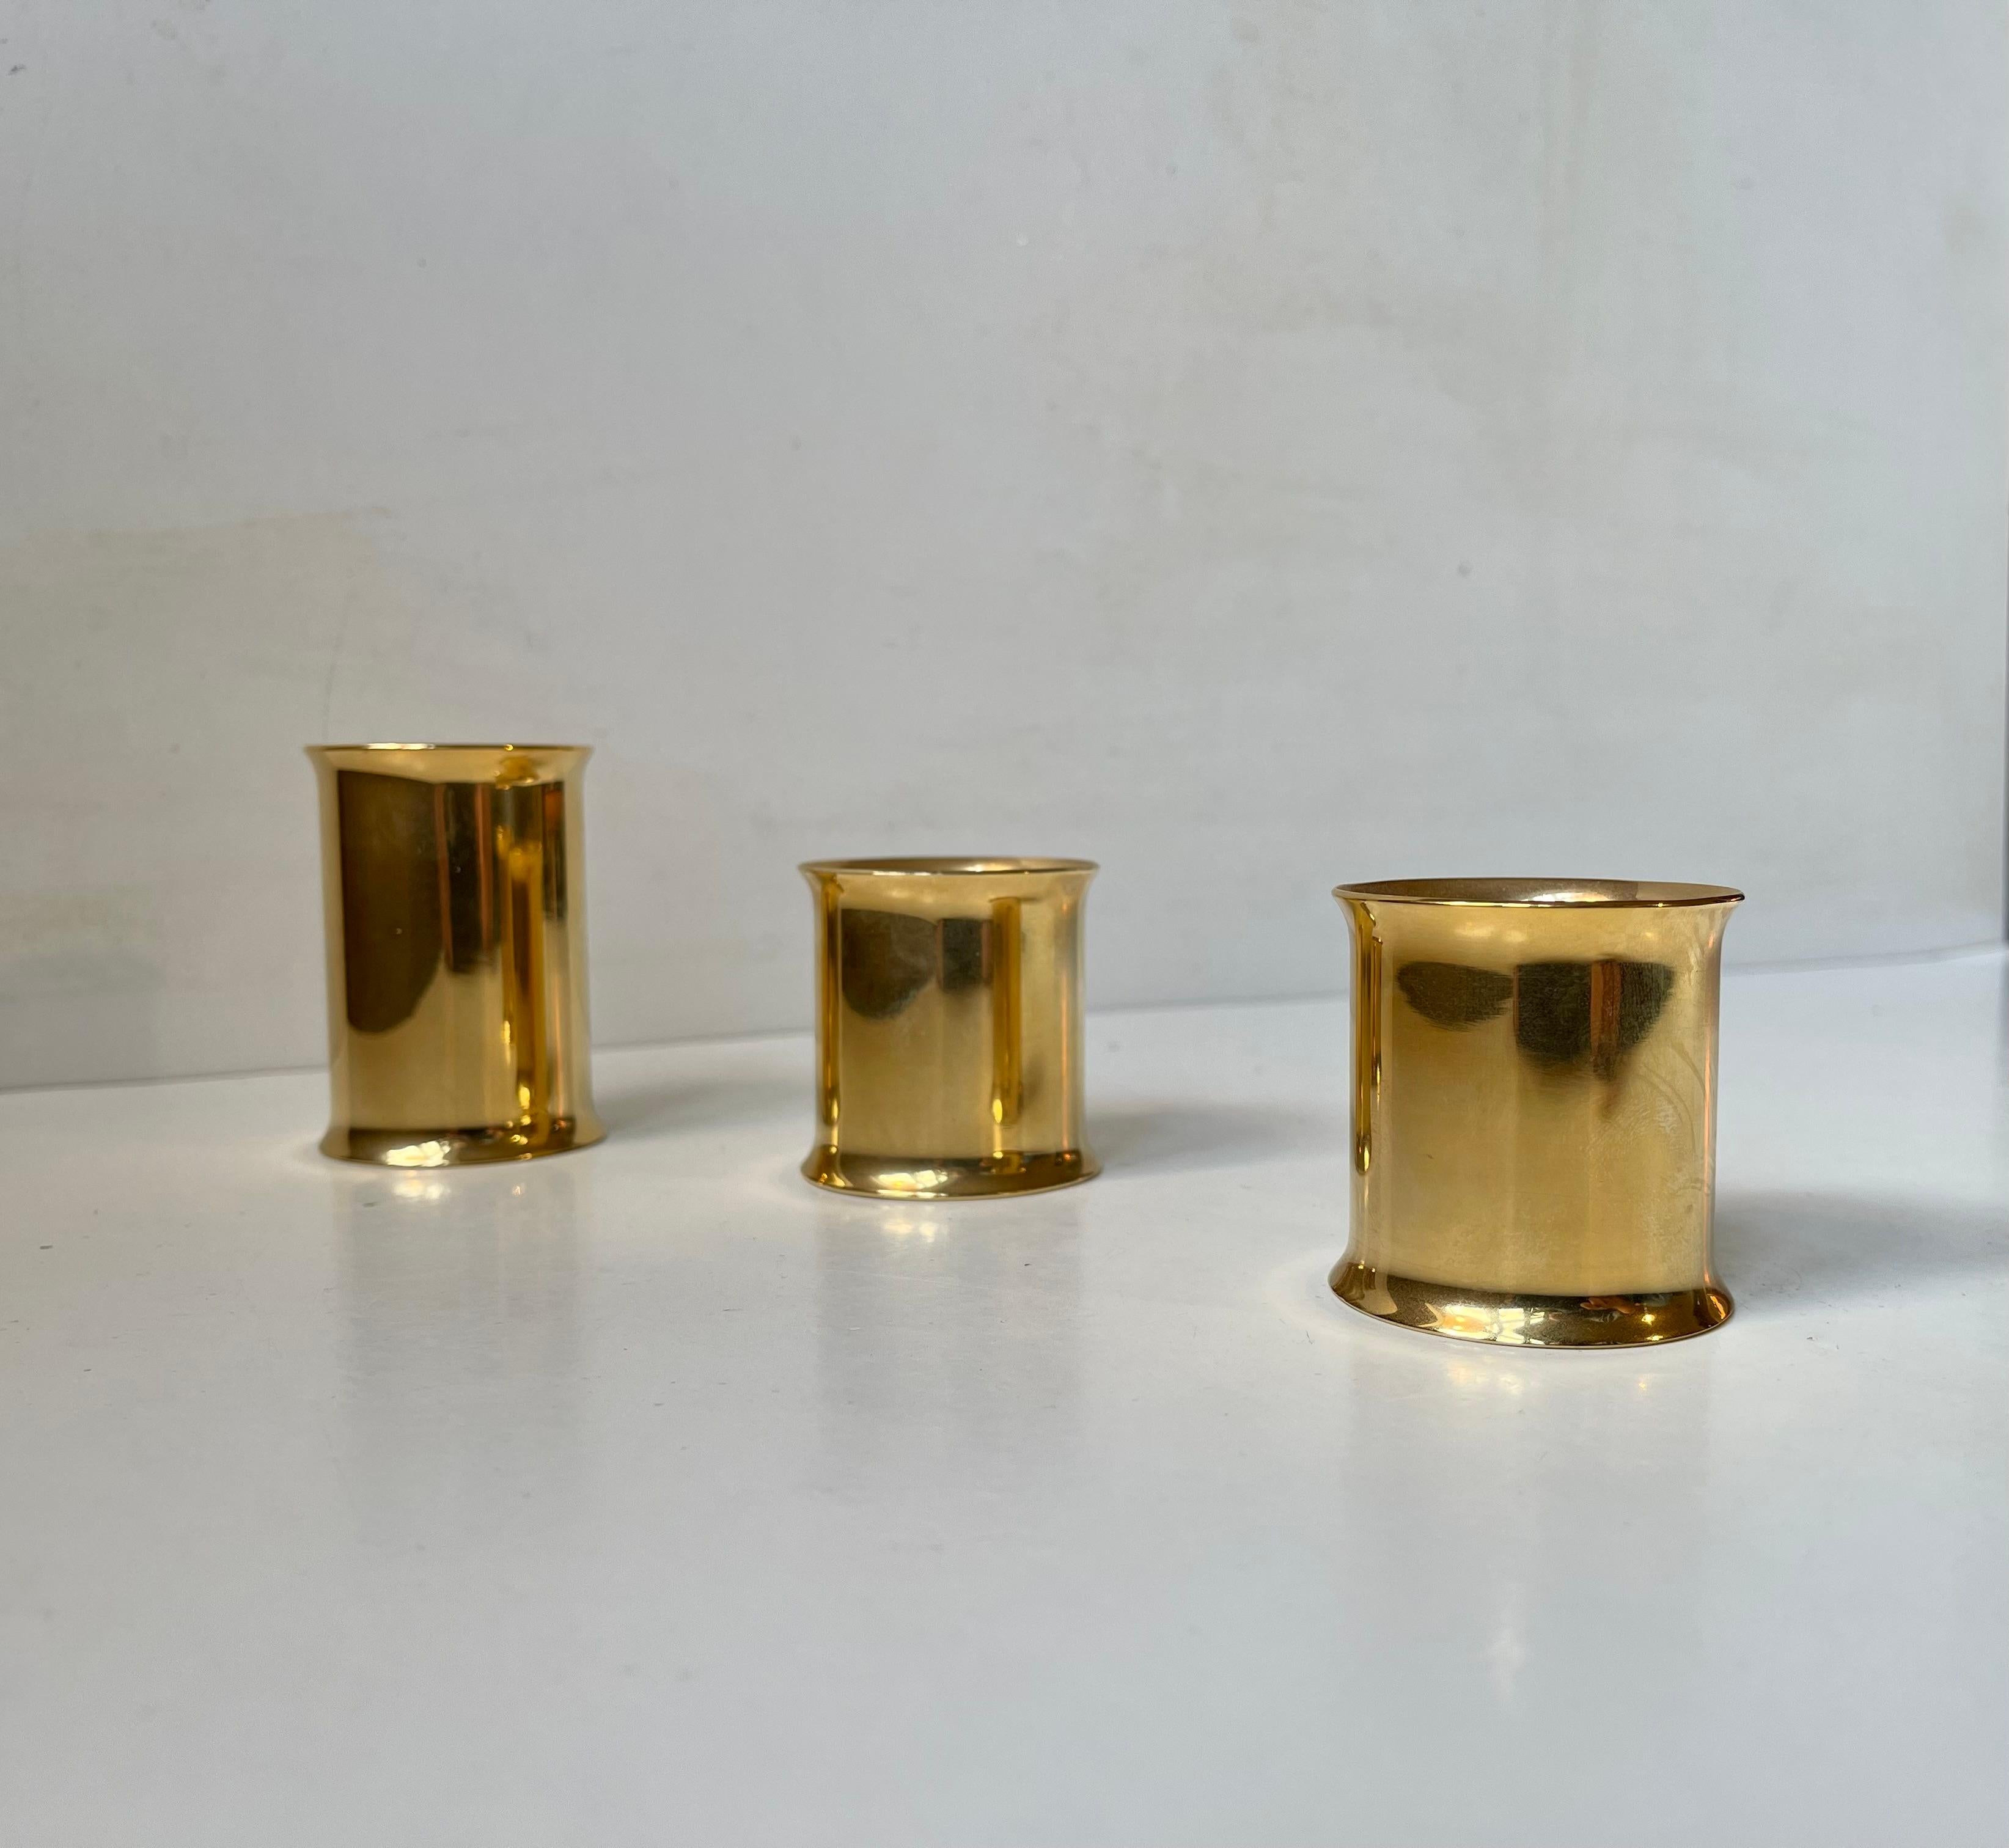 A set of 3 danish modern chimney shaped candleholders. Made from 24 carat gold plated brass. they can be installed with either tea lights (one side) or church/bloc candles. (other sides. Reminiscent in design to similar candleholder by Hans Agne